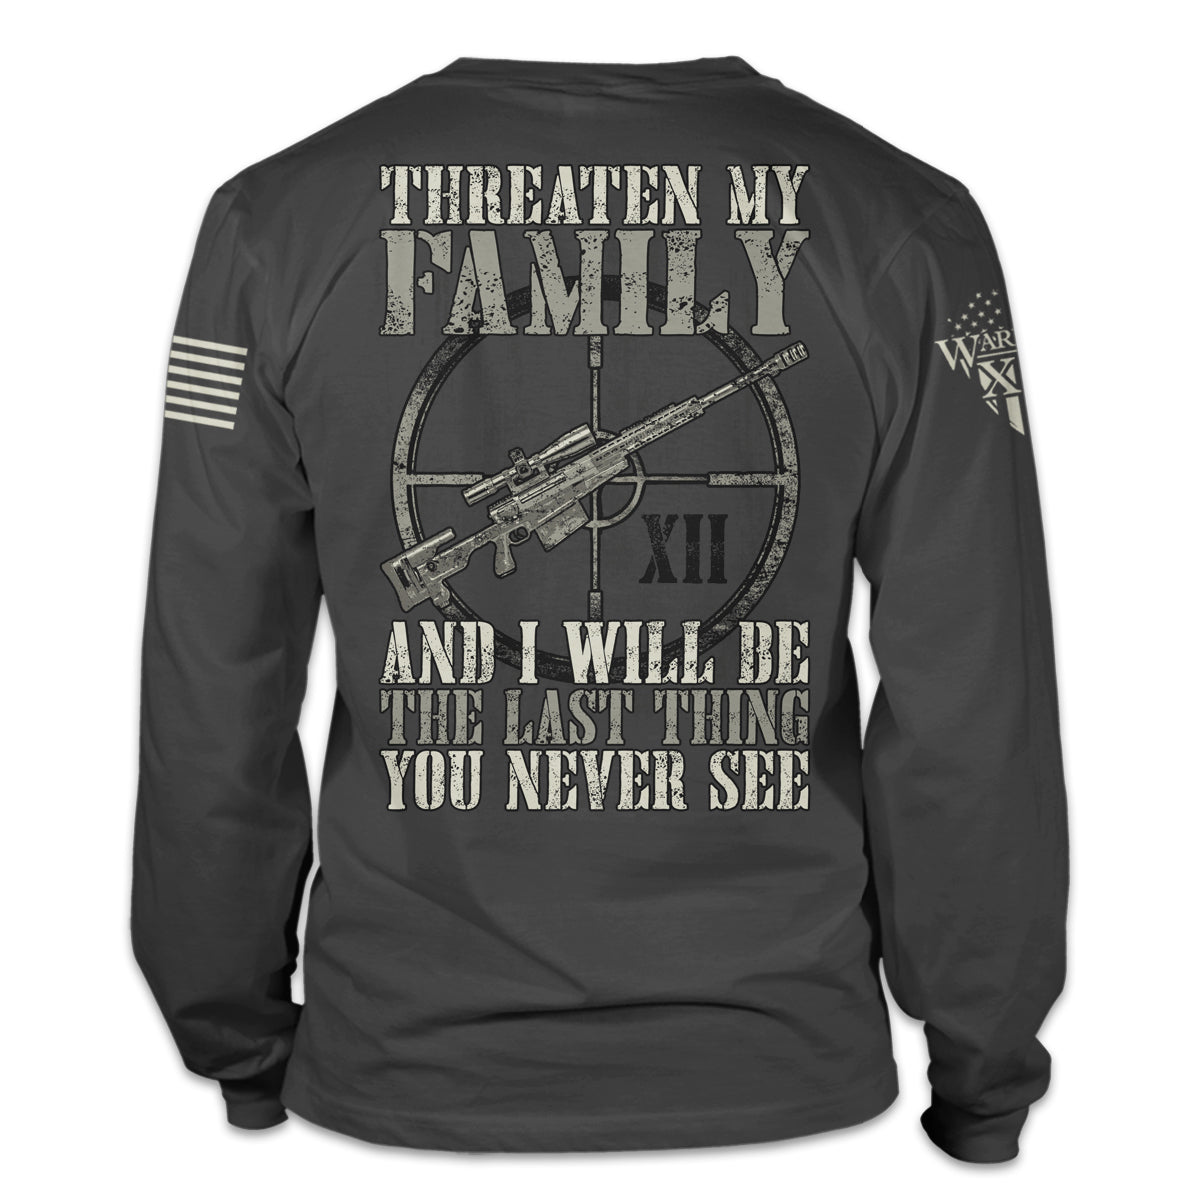 A grey long sleeve shirt with the words "Threaten My Family and I'll Be The Last Thing You Never See" and a gun printed on the back of the shirt.